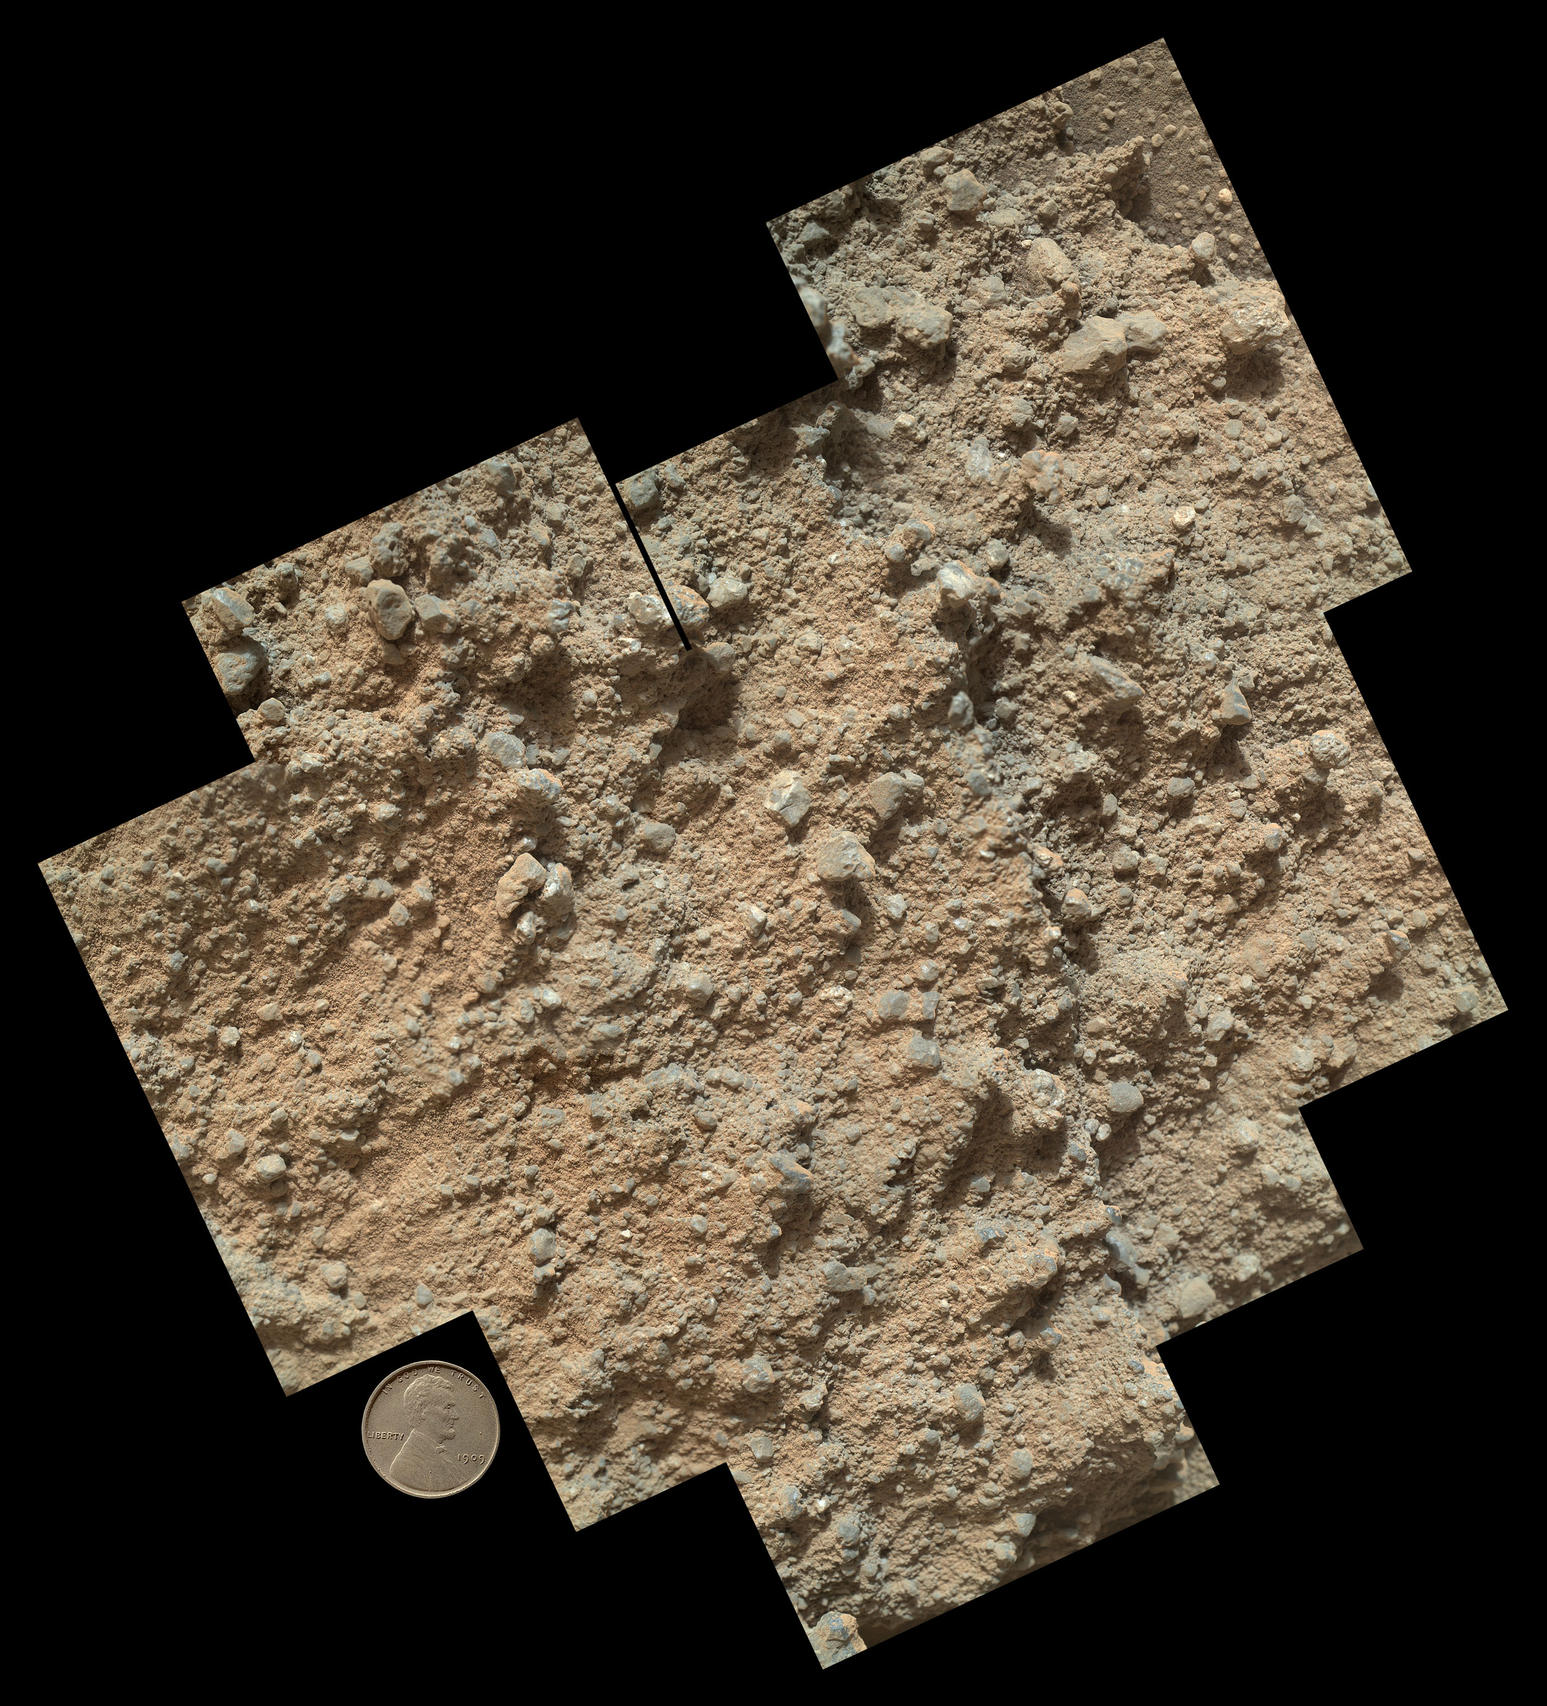 Pebbly Sandstone Conglomerate Rock at Curiosity's Waypoint 1